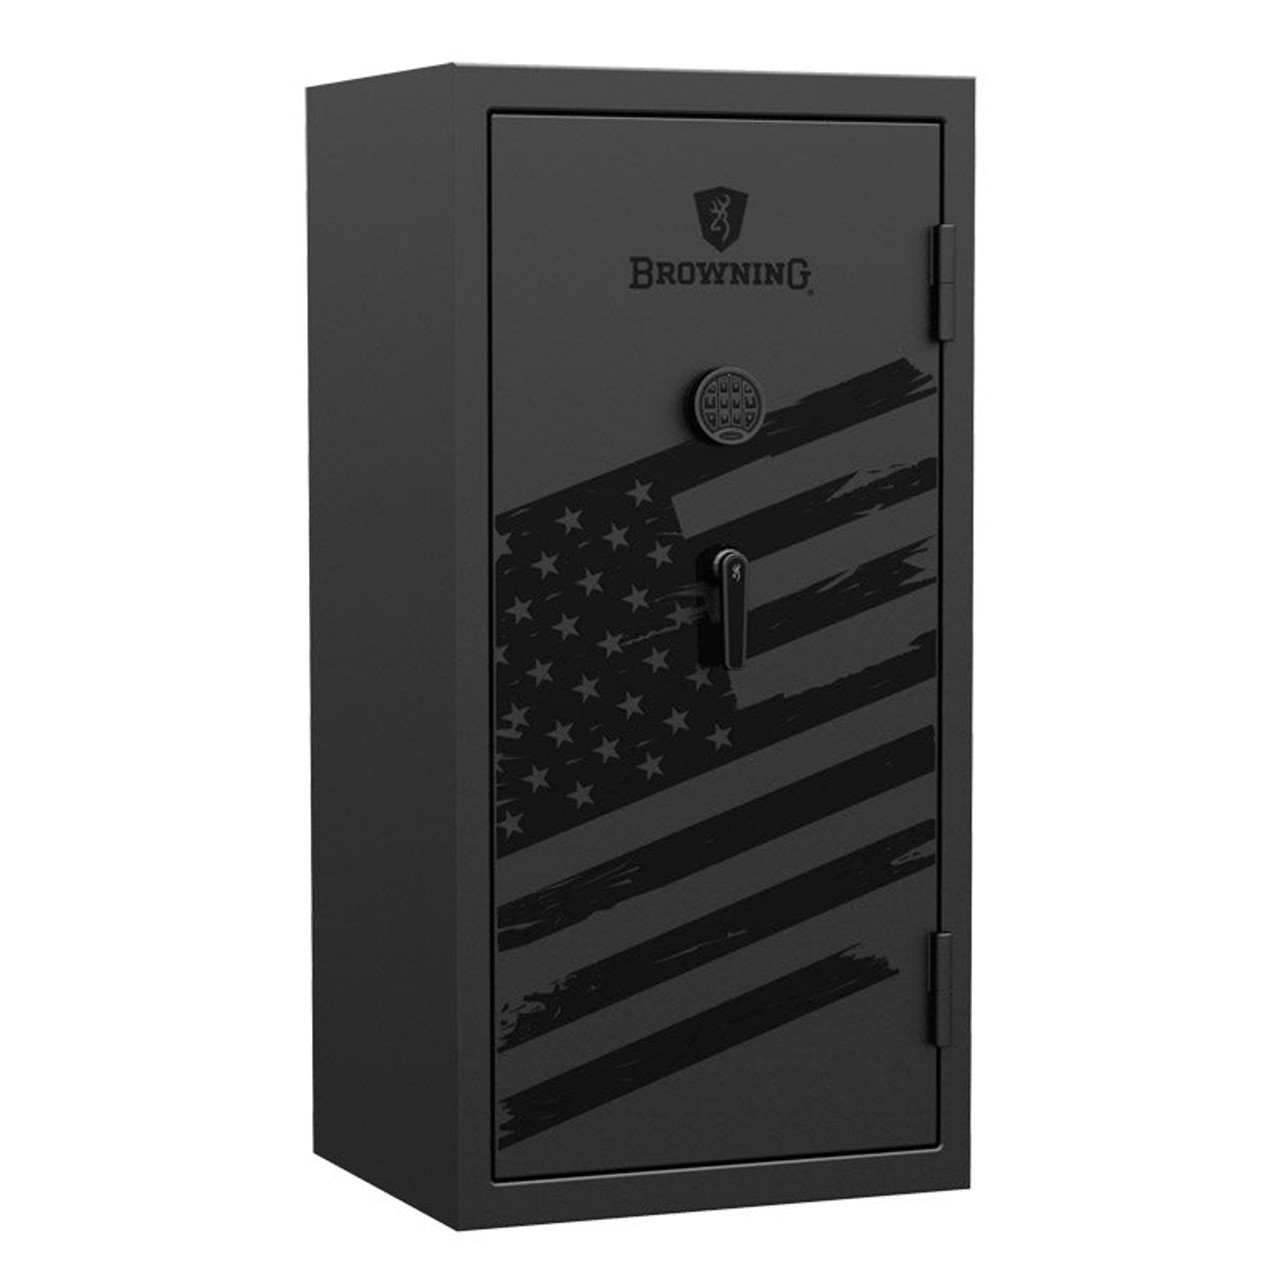 Browning MP Blackout Series Safe-MP33